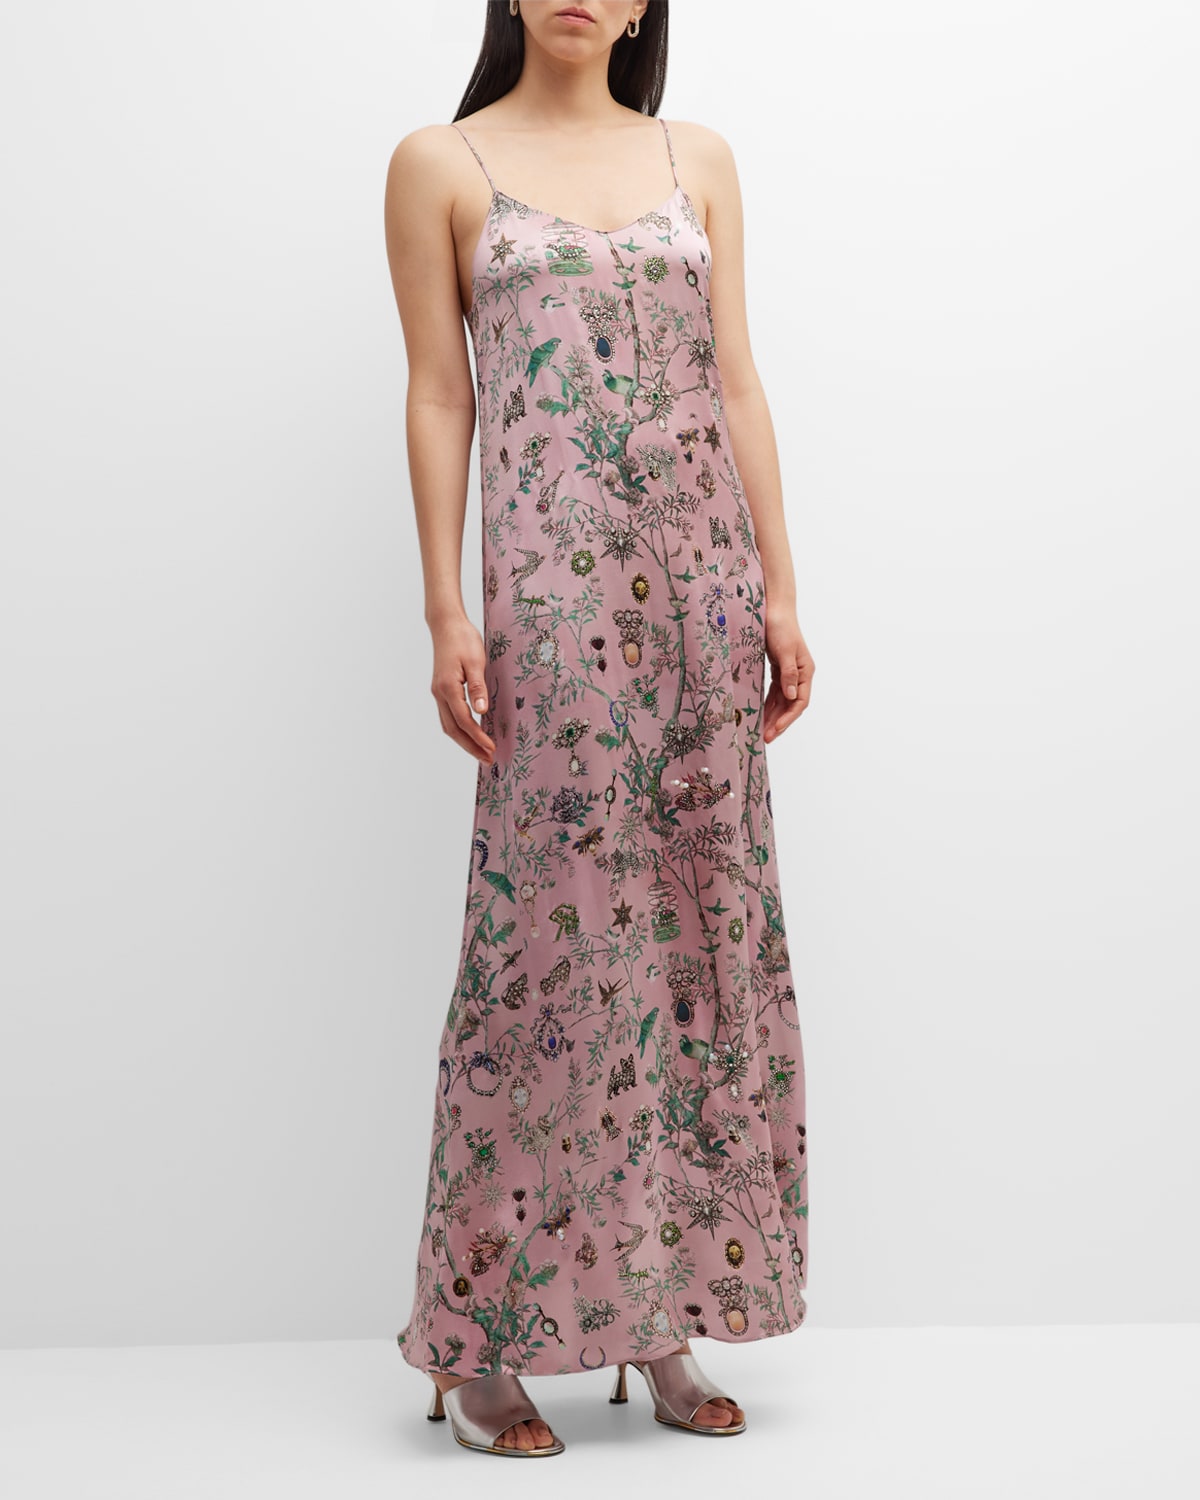 Libertine Pauline De Rothchild Classic Printed Slip Dress With Crystals In Pink Multi